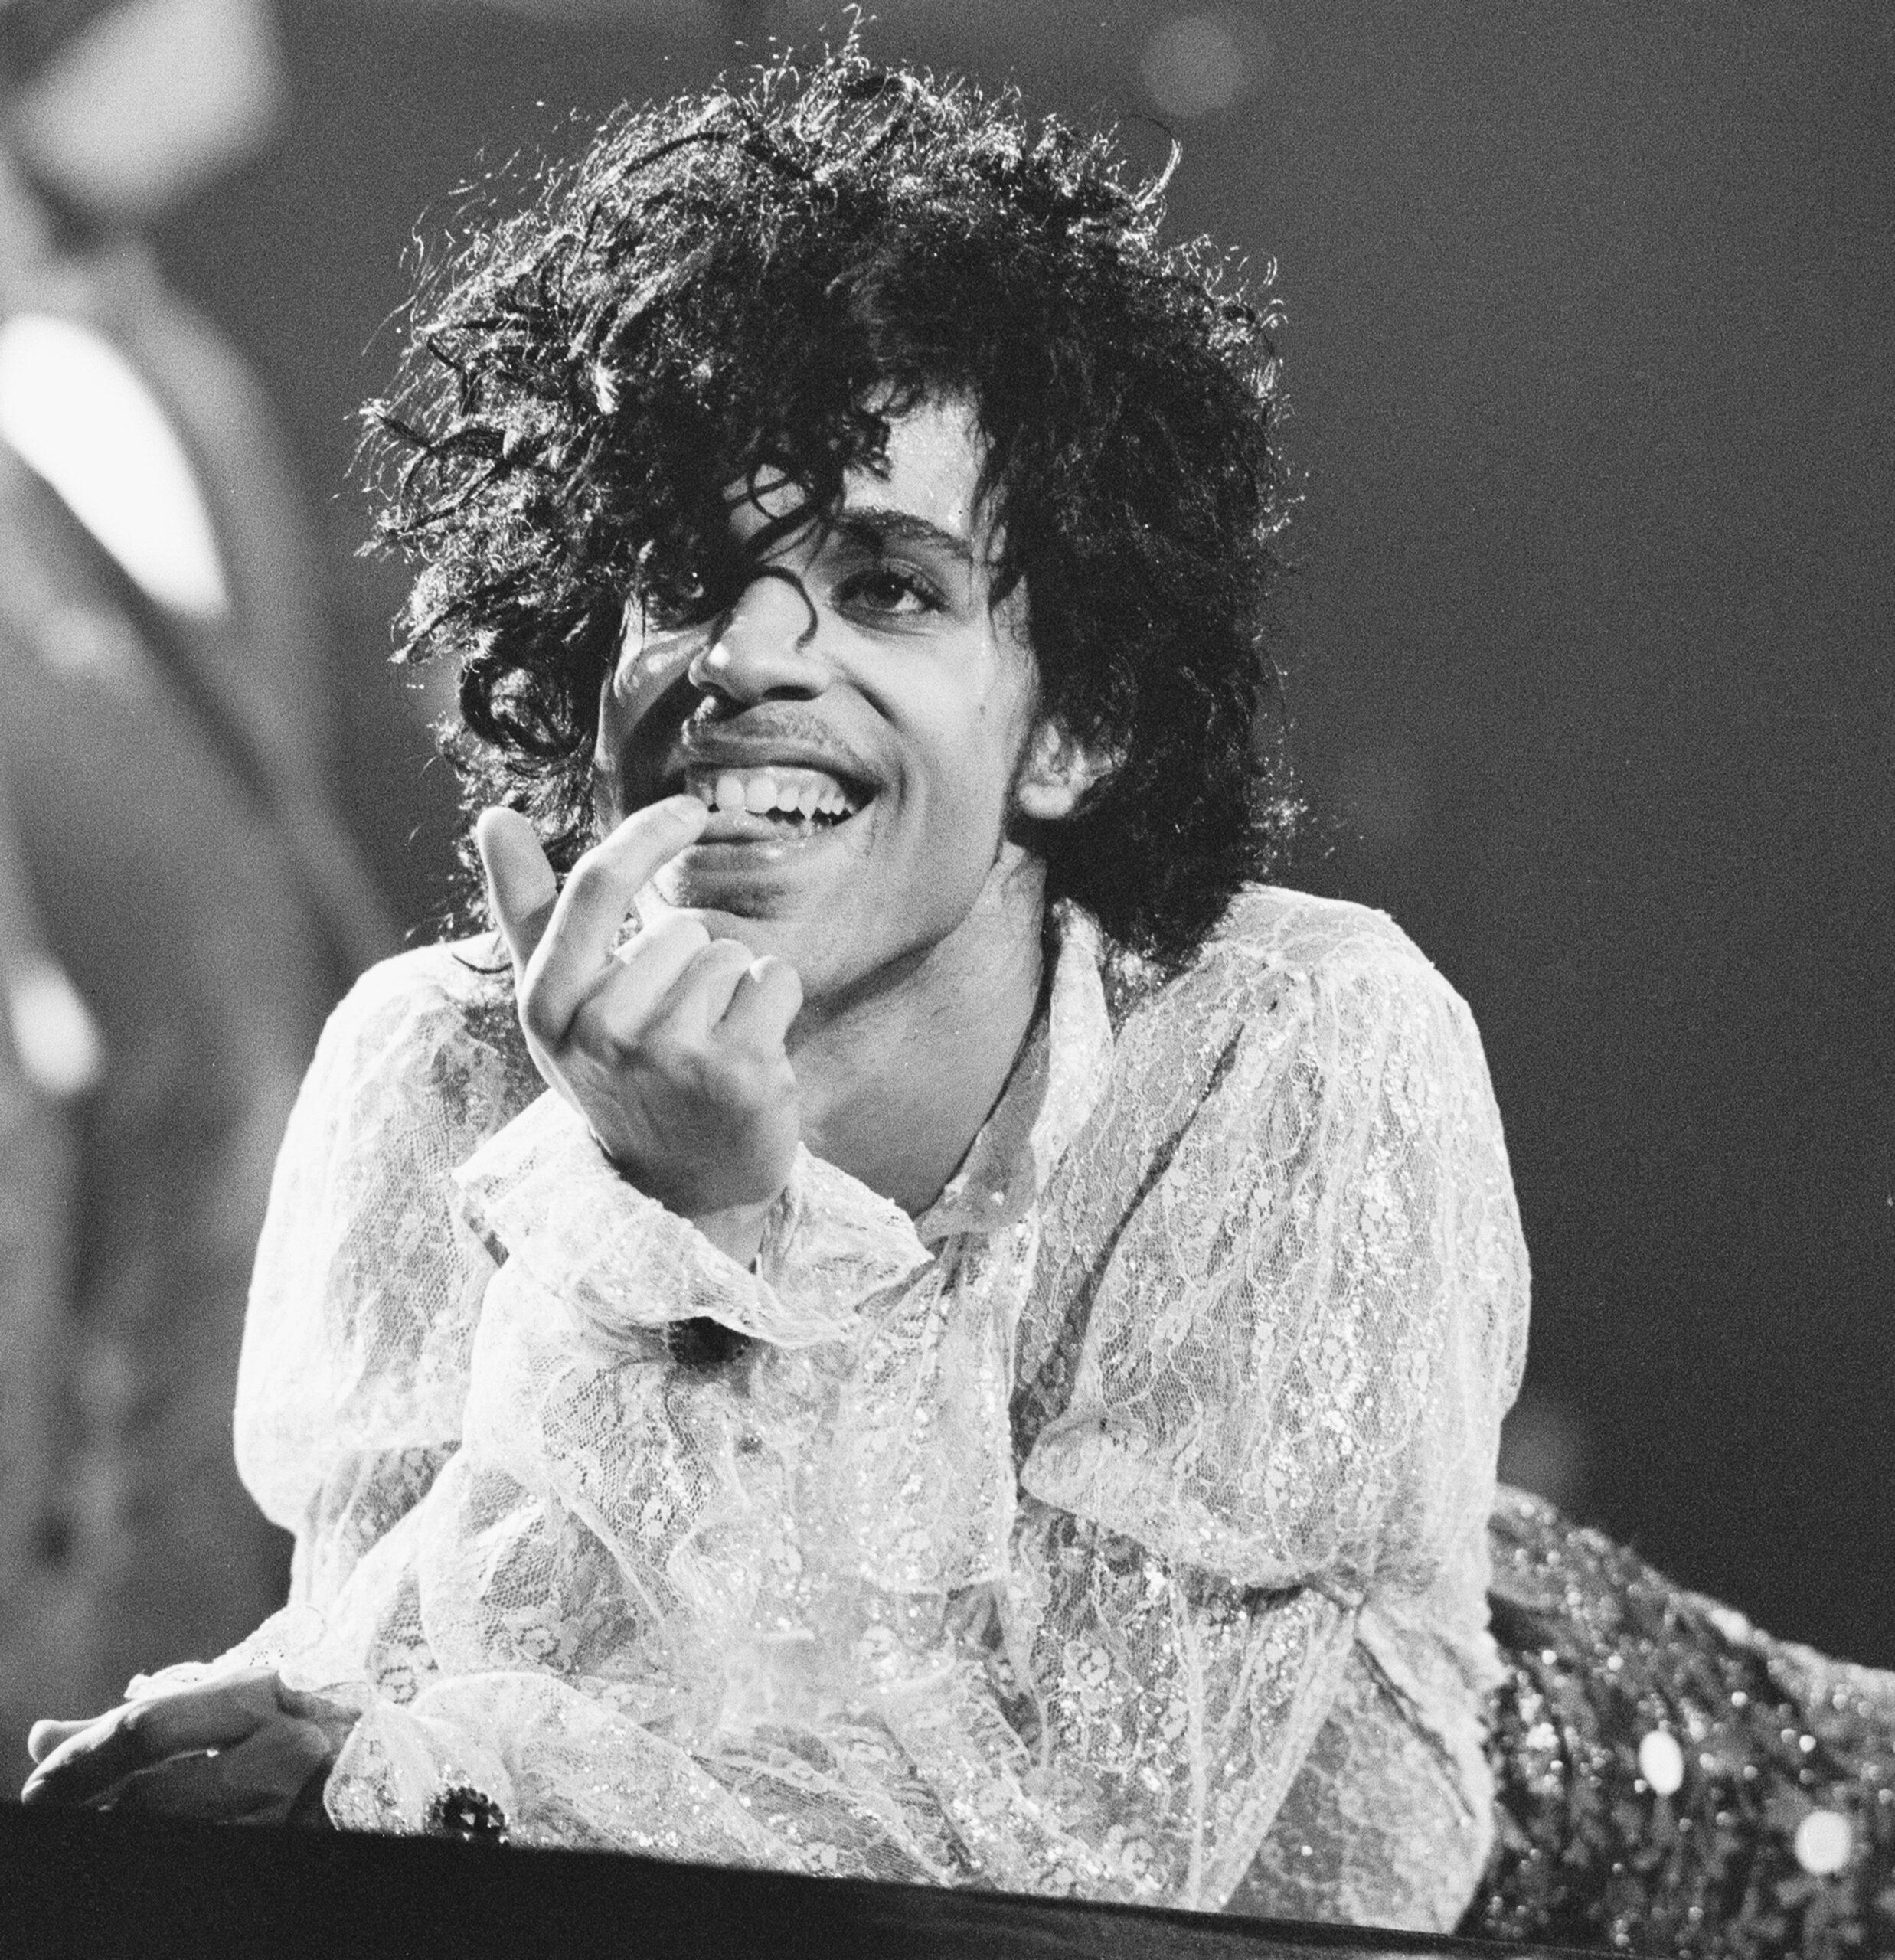 A photo showing Prince with full hair.